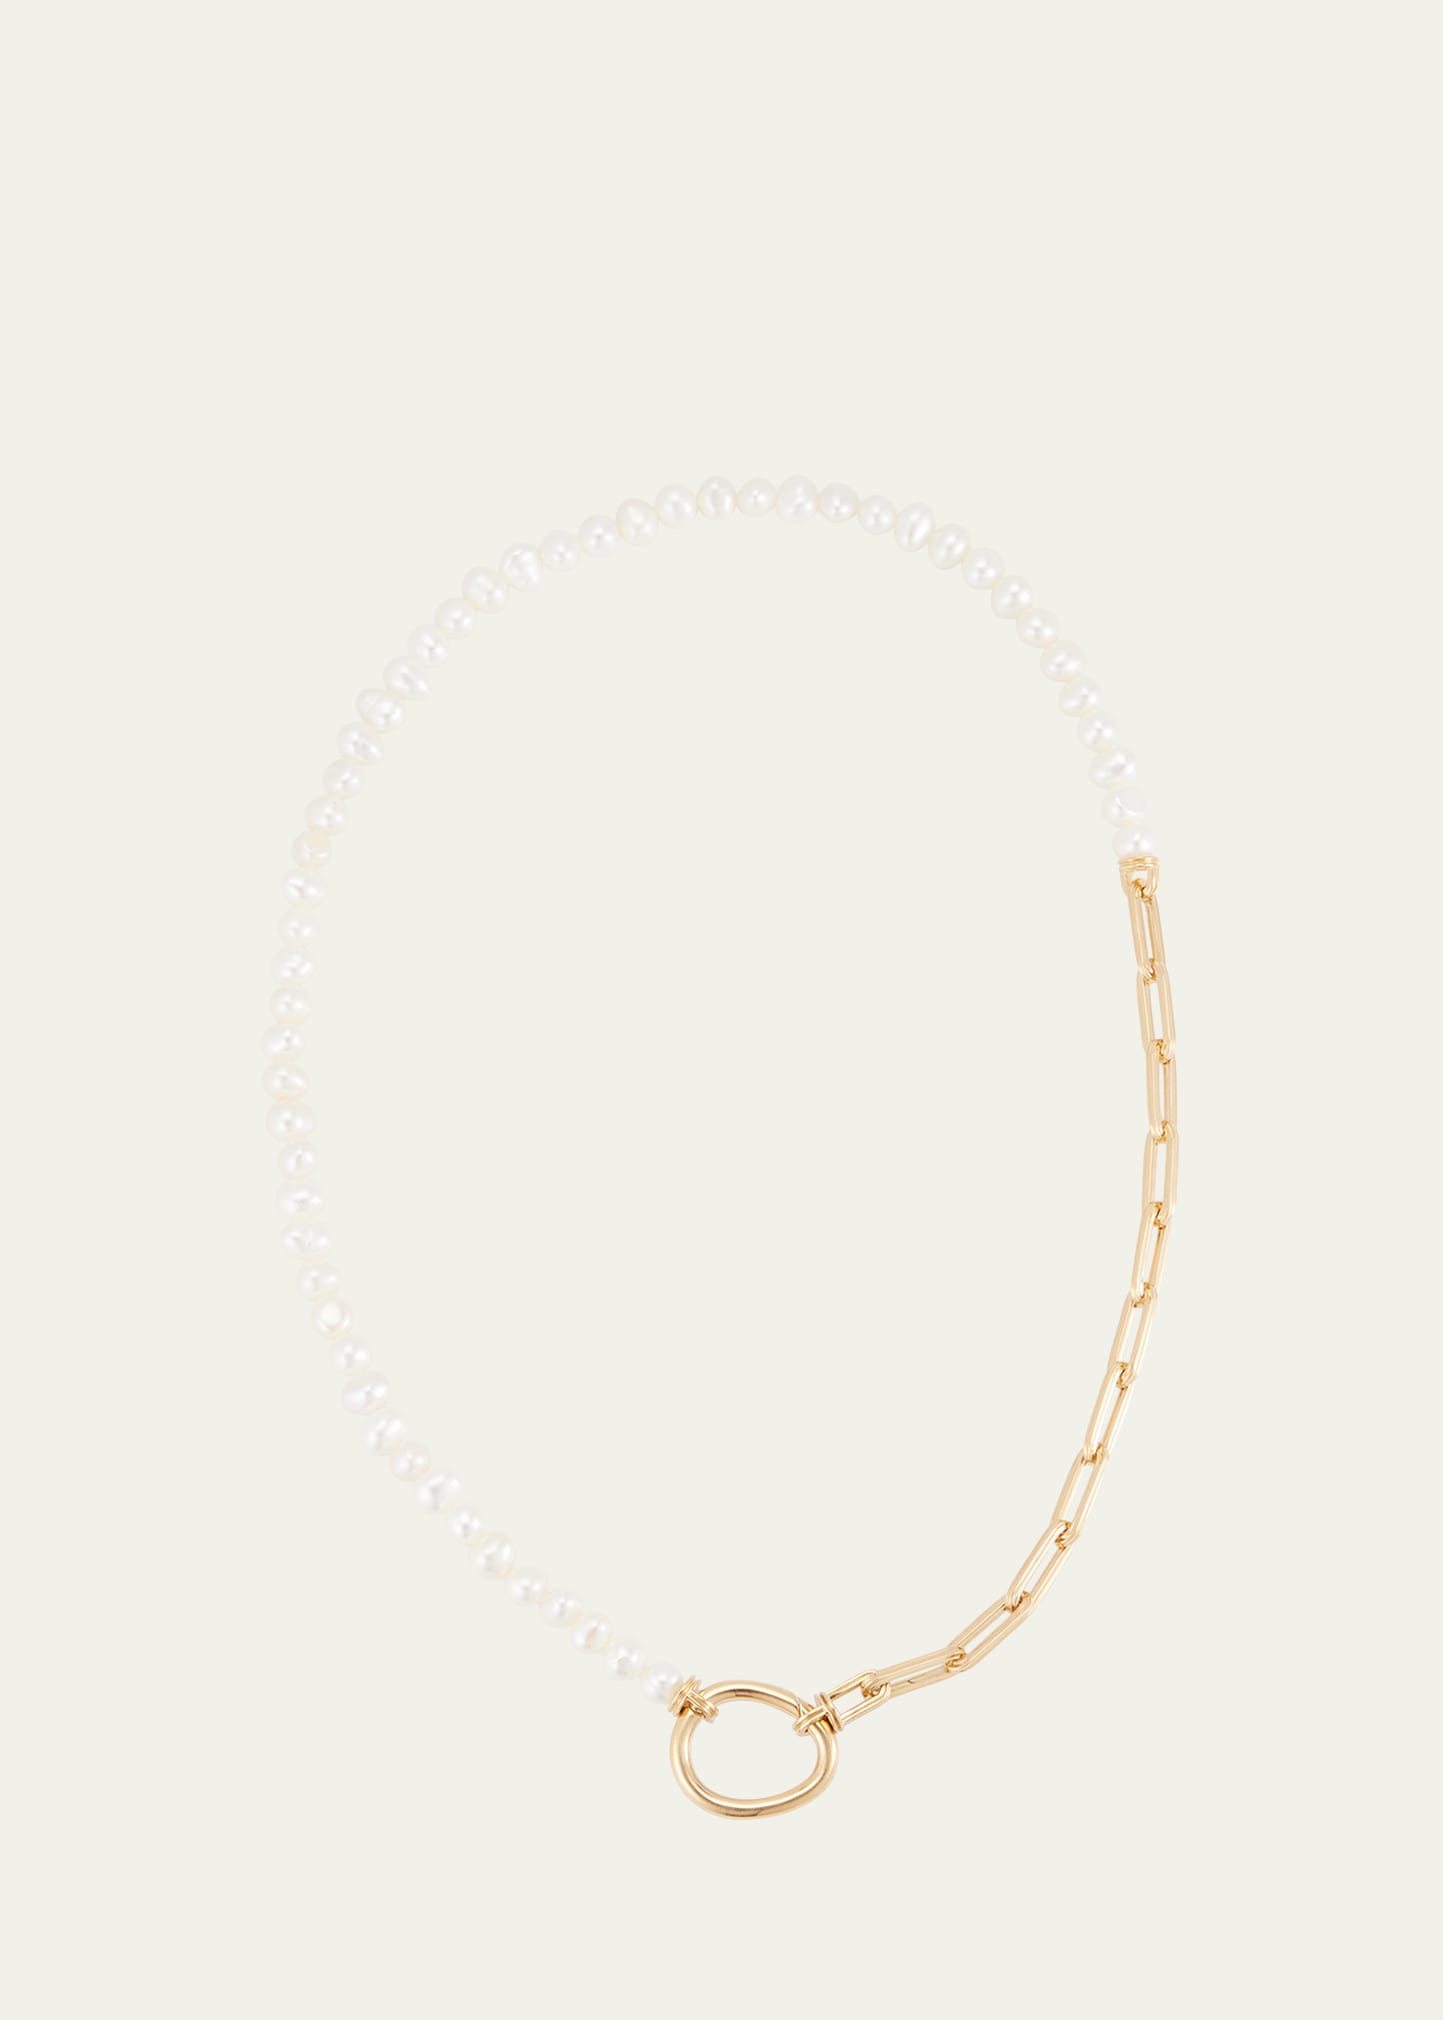 18K Yellow Gold Lien Perles Necklace with 50 Freshwater Pearls